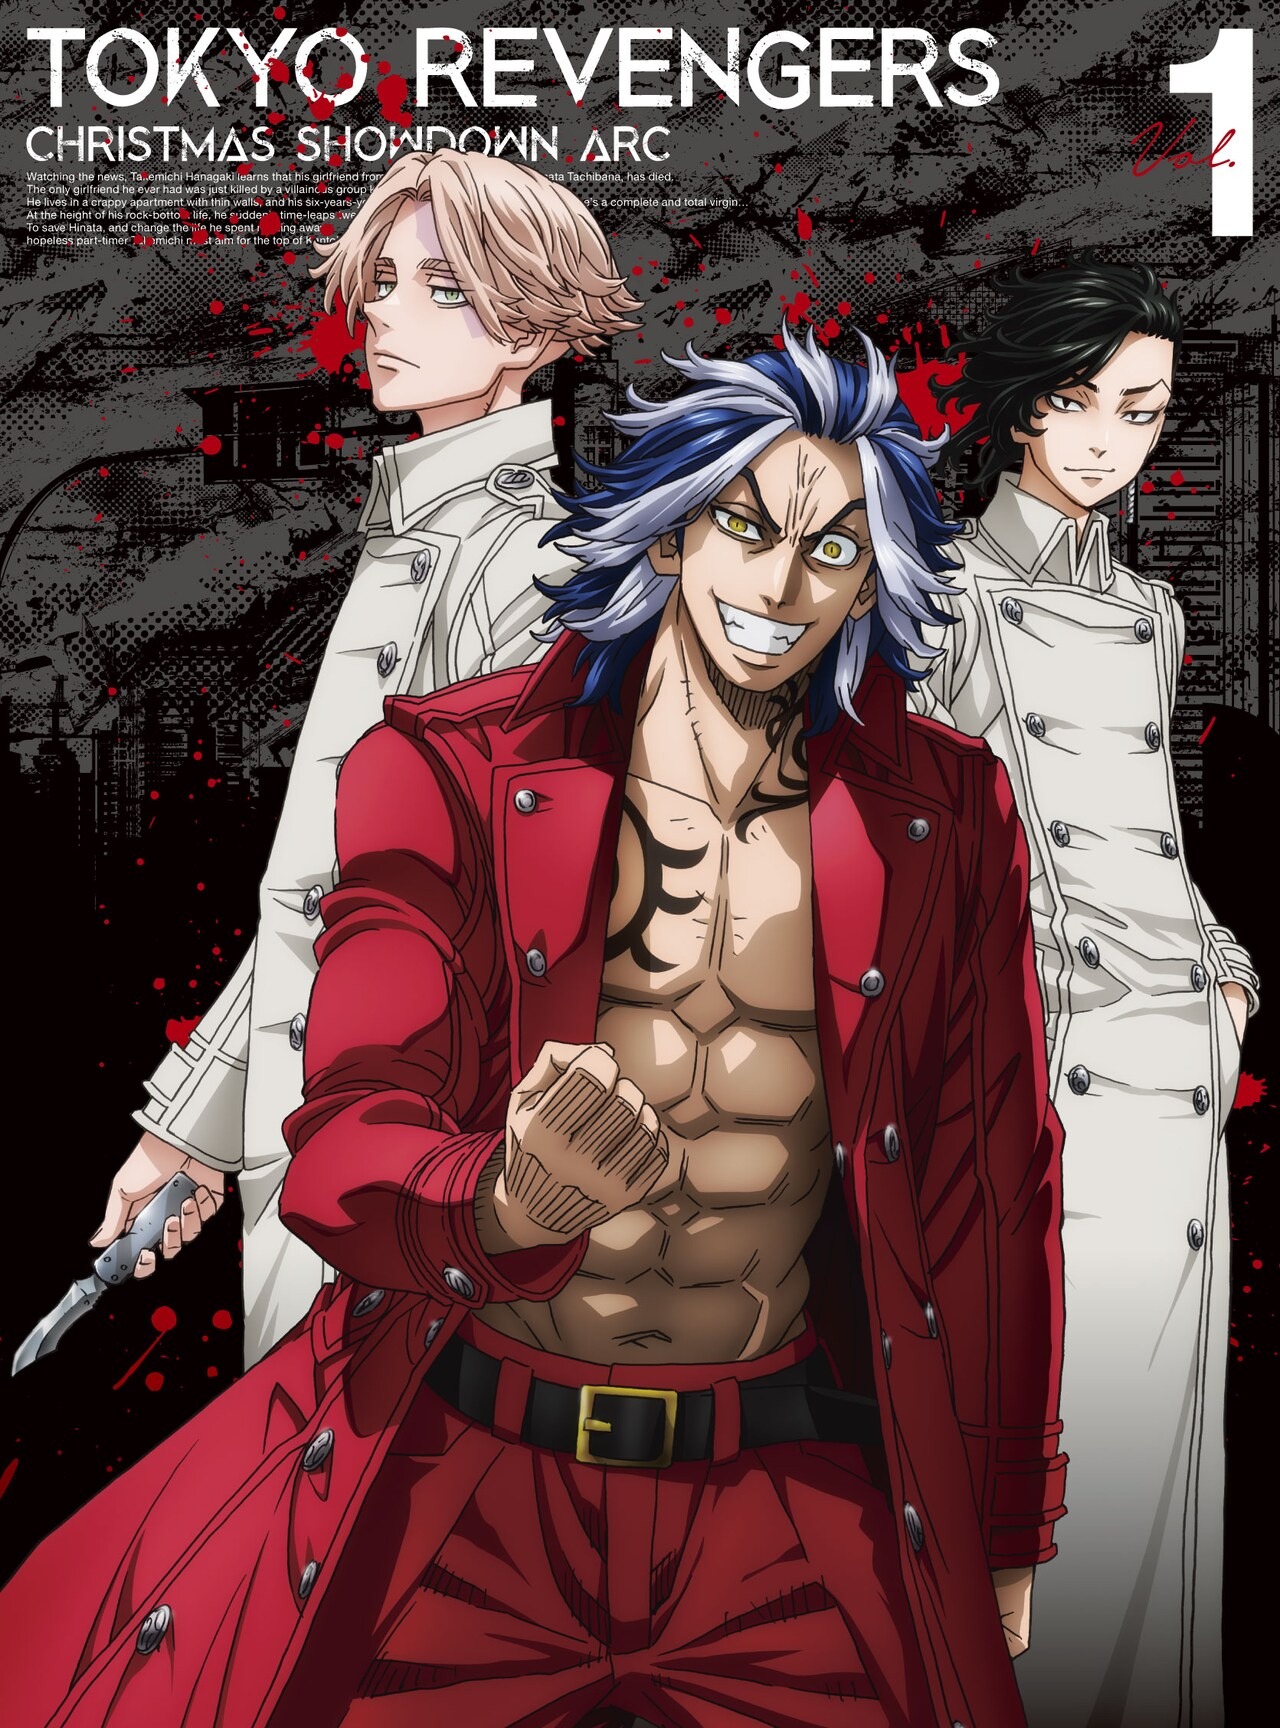 Anime News And Facts on X: Tokyo Revengers Season 2 is listed with 13  Episodes.  / X